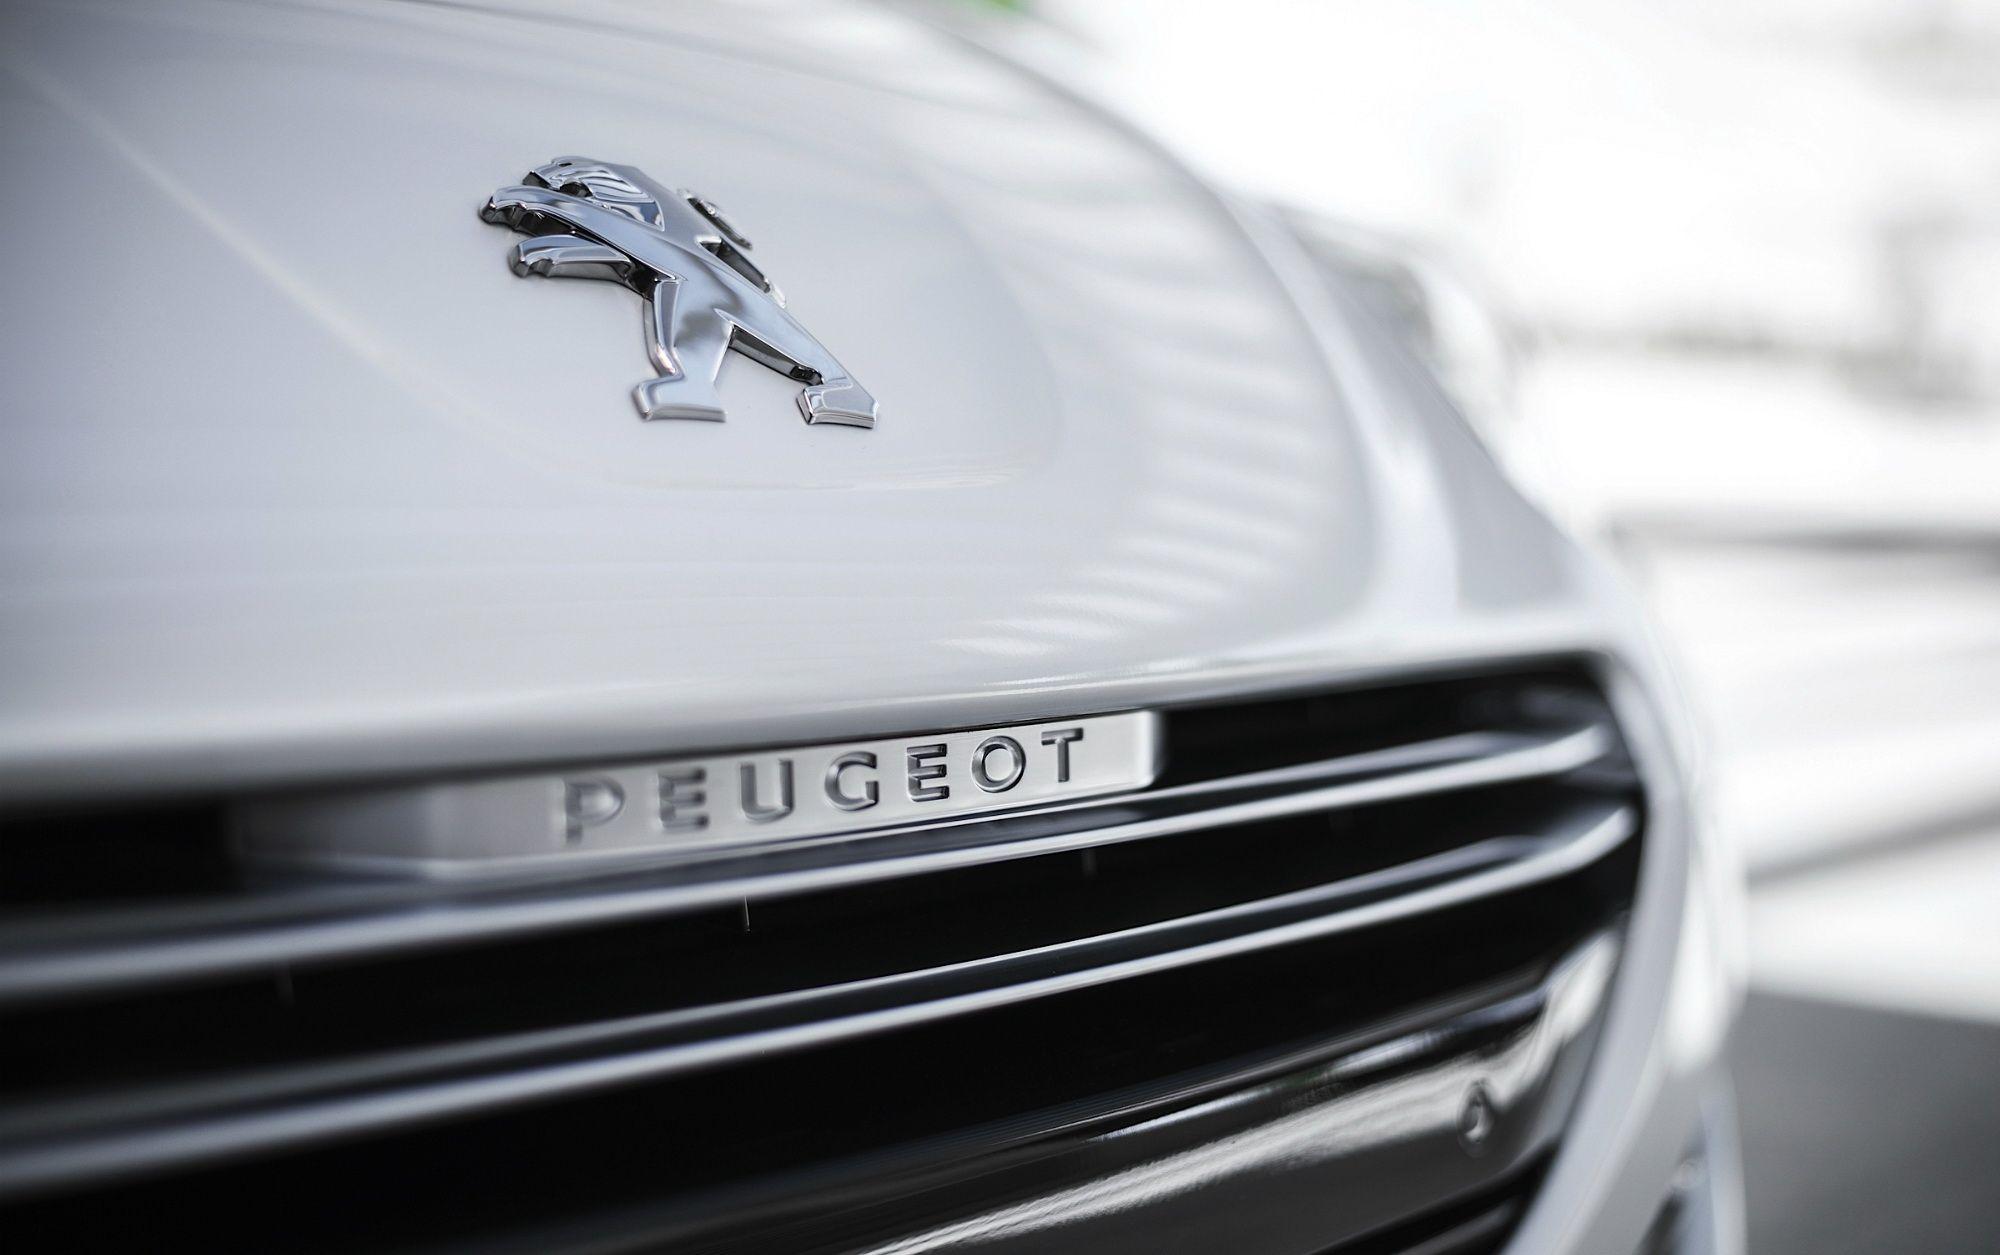 Lion Auto Logo - Peugeot Logo, Peugeot Car Symbol Meaning and History. Car Brand